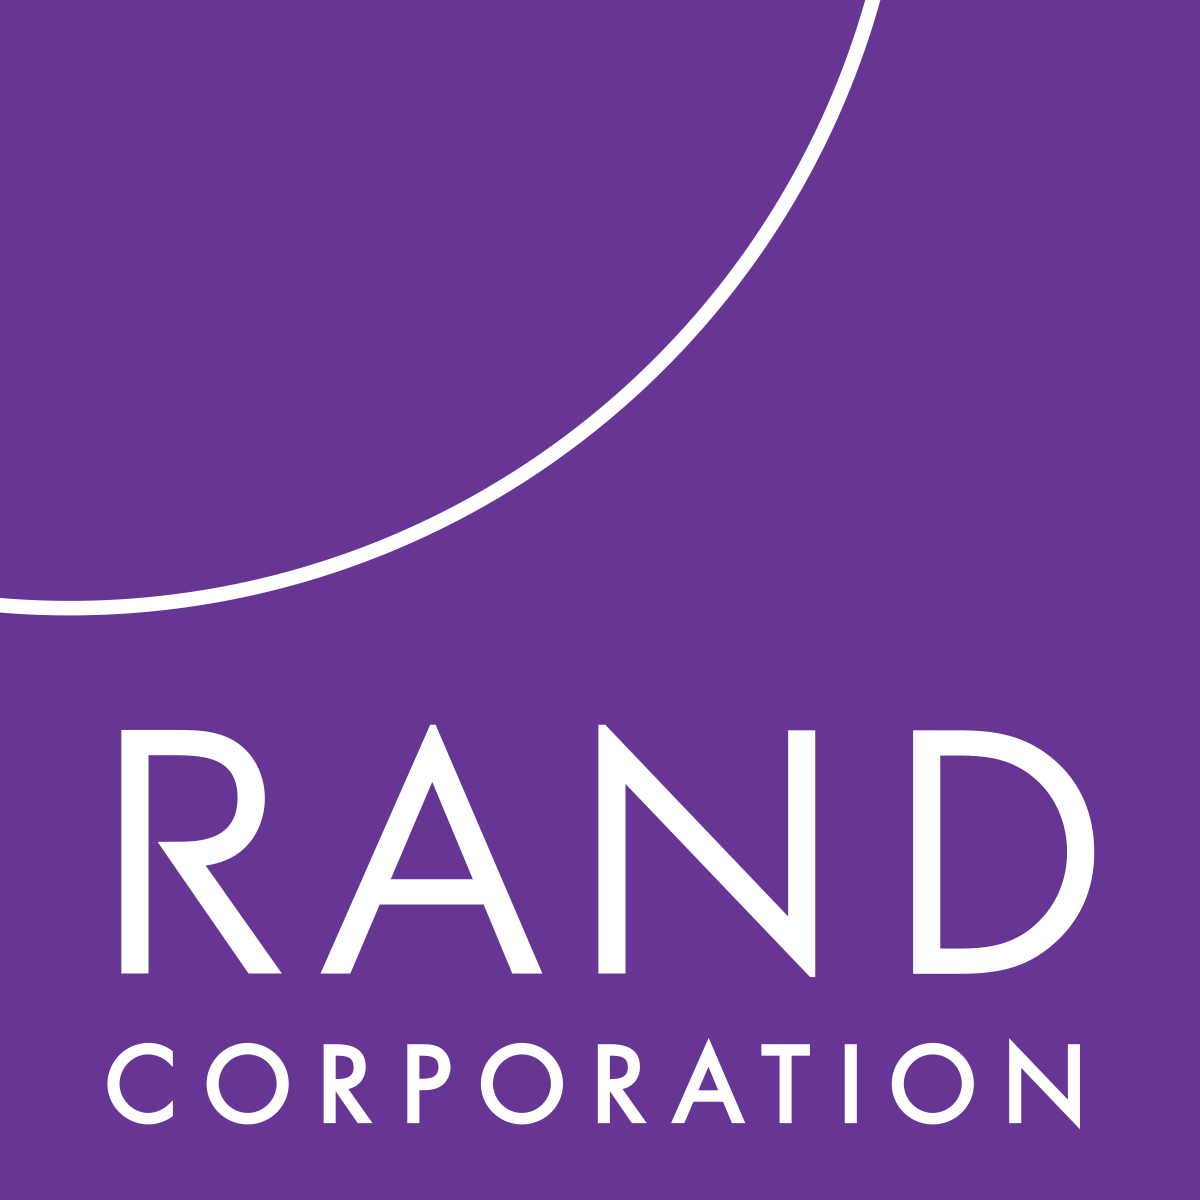 Abd W Logo - RAND Corporation Provides Objective Research Services and Public ...